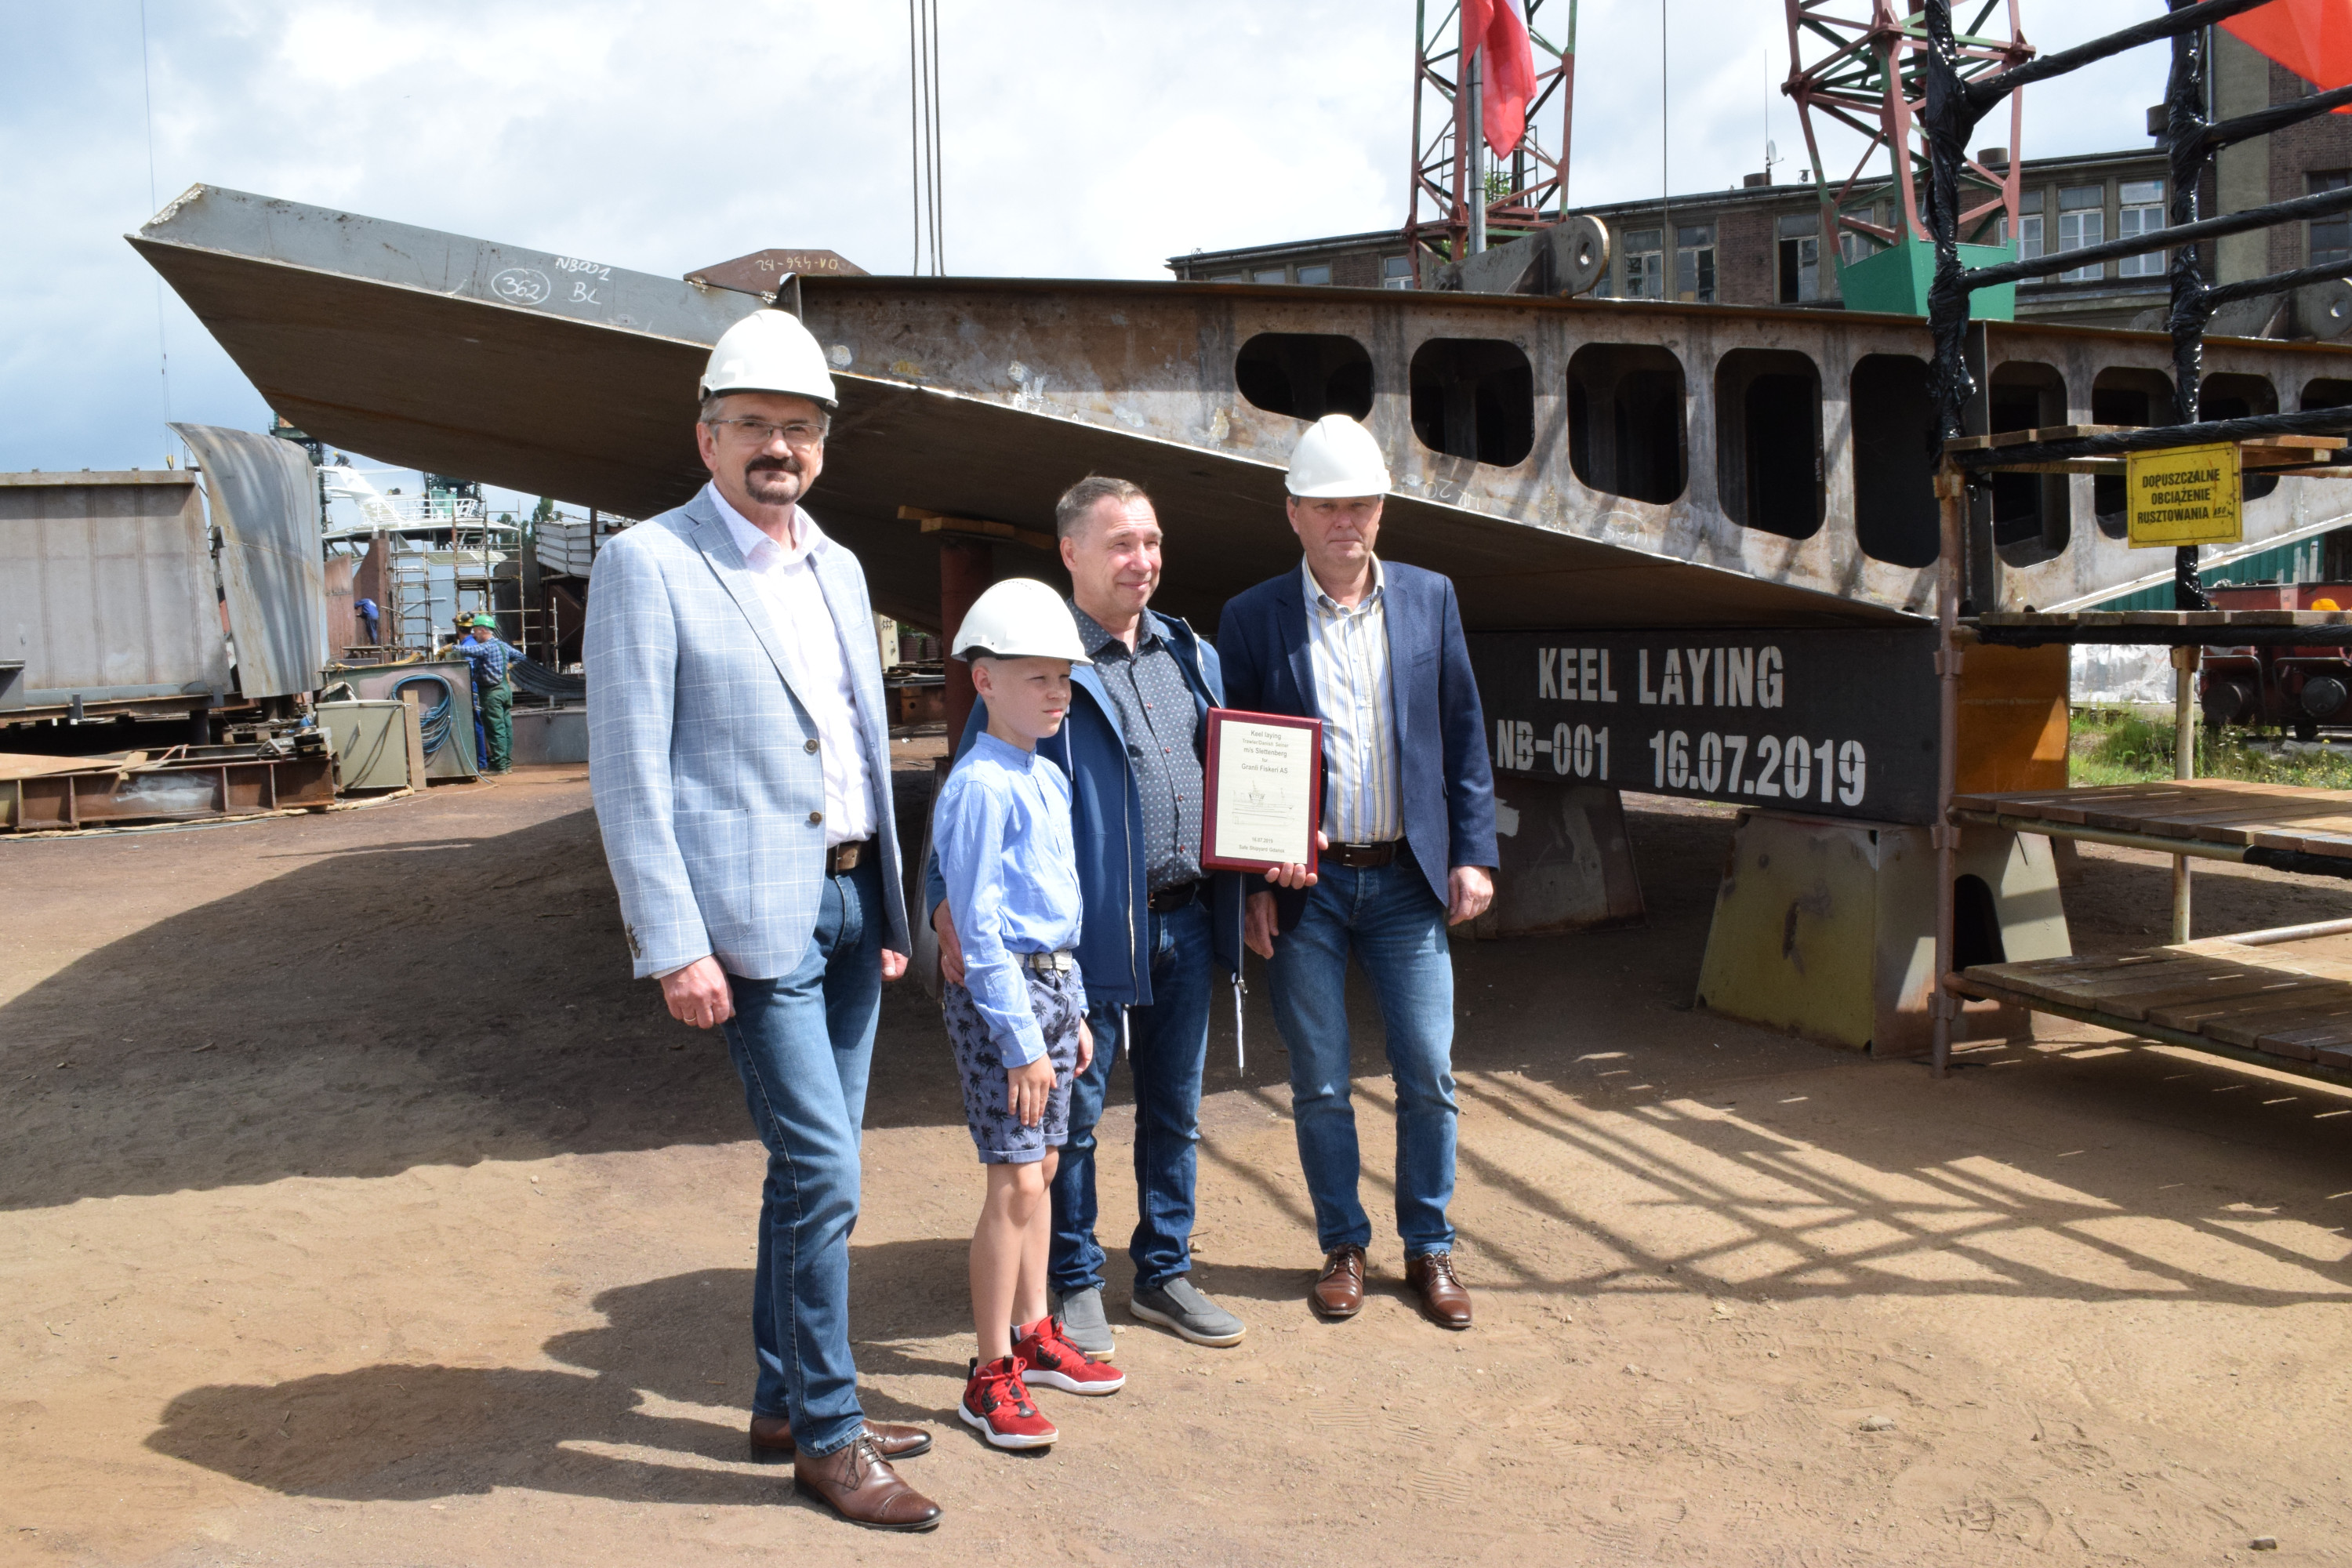 NB001 keel laying ceremony